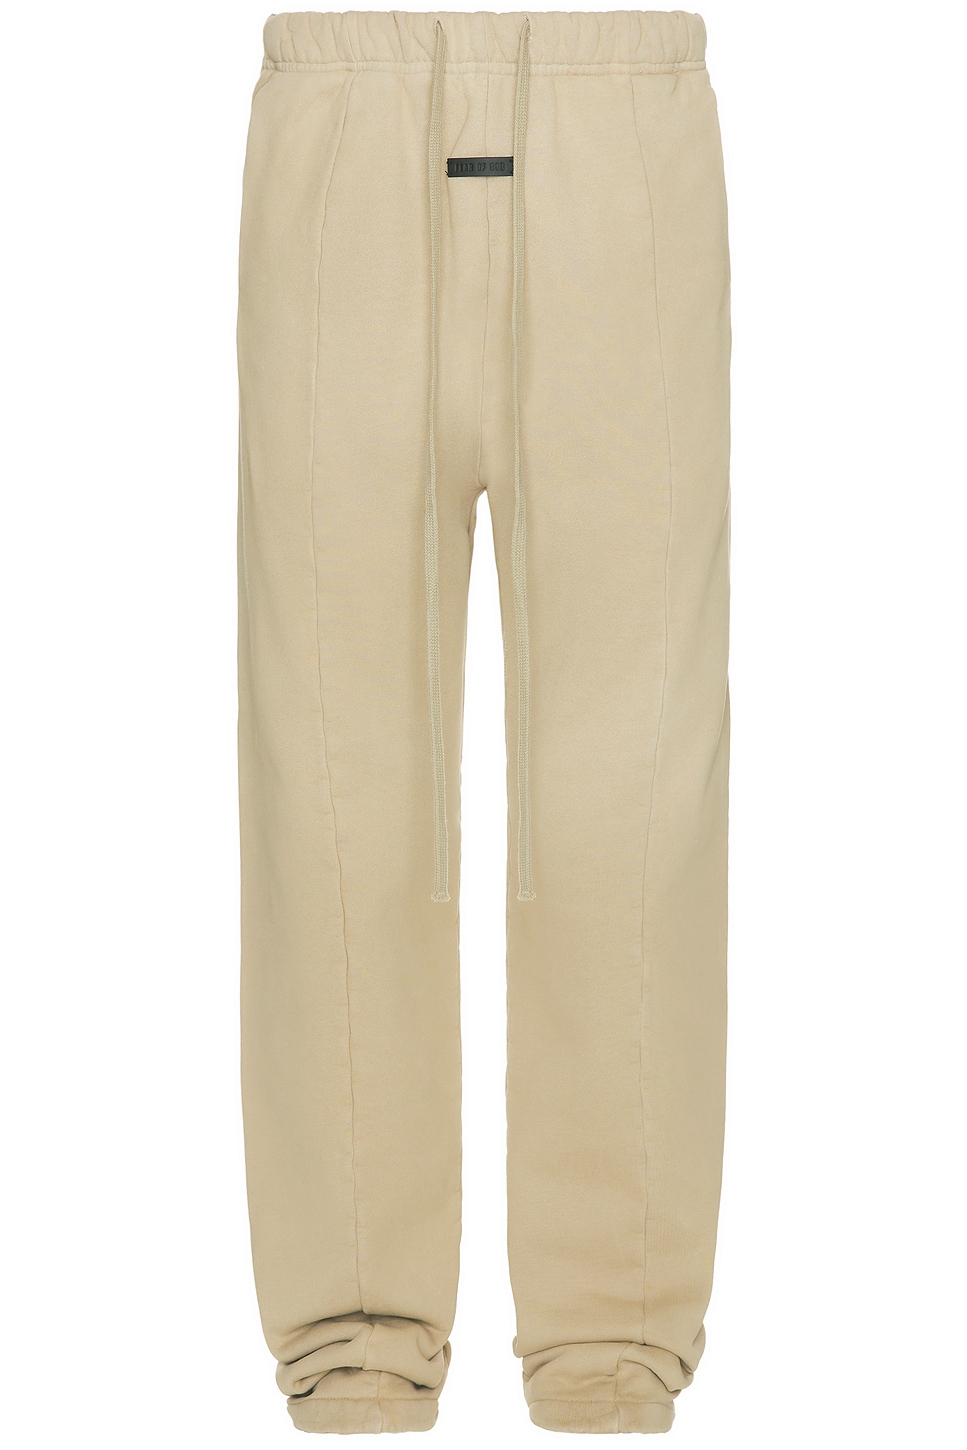 Image 1 of Fear of God Forum Sweatpant in Camel